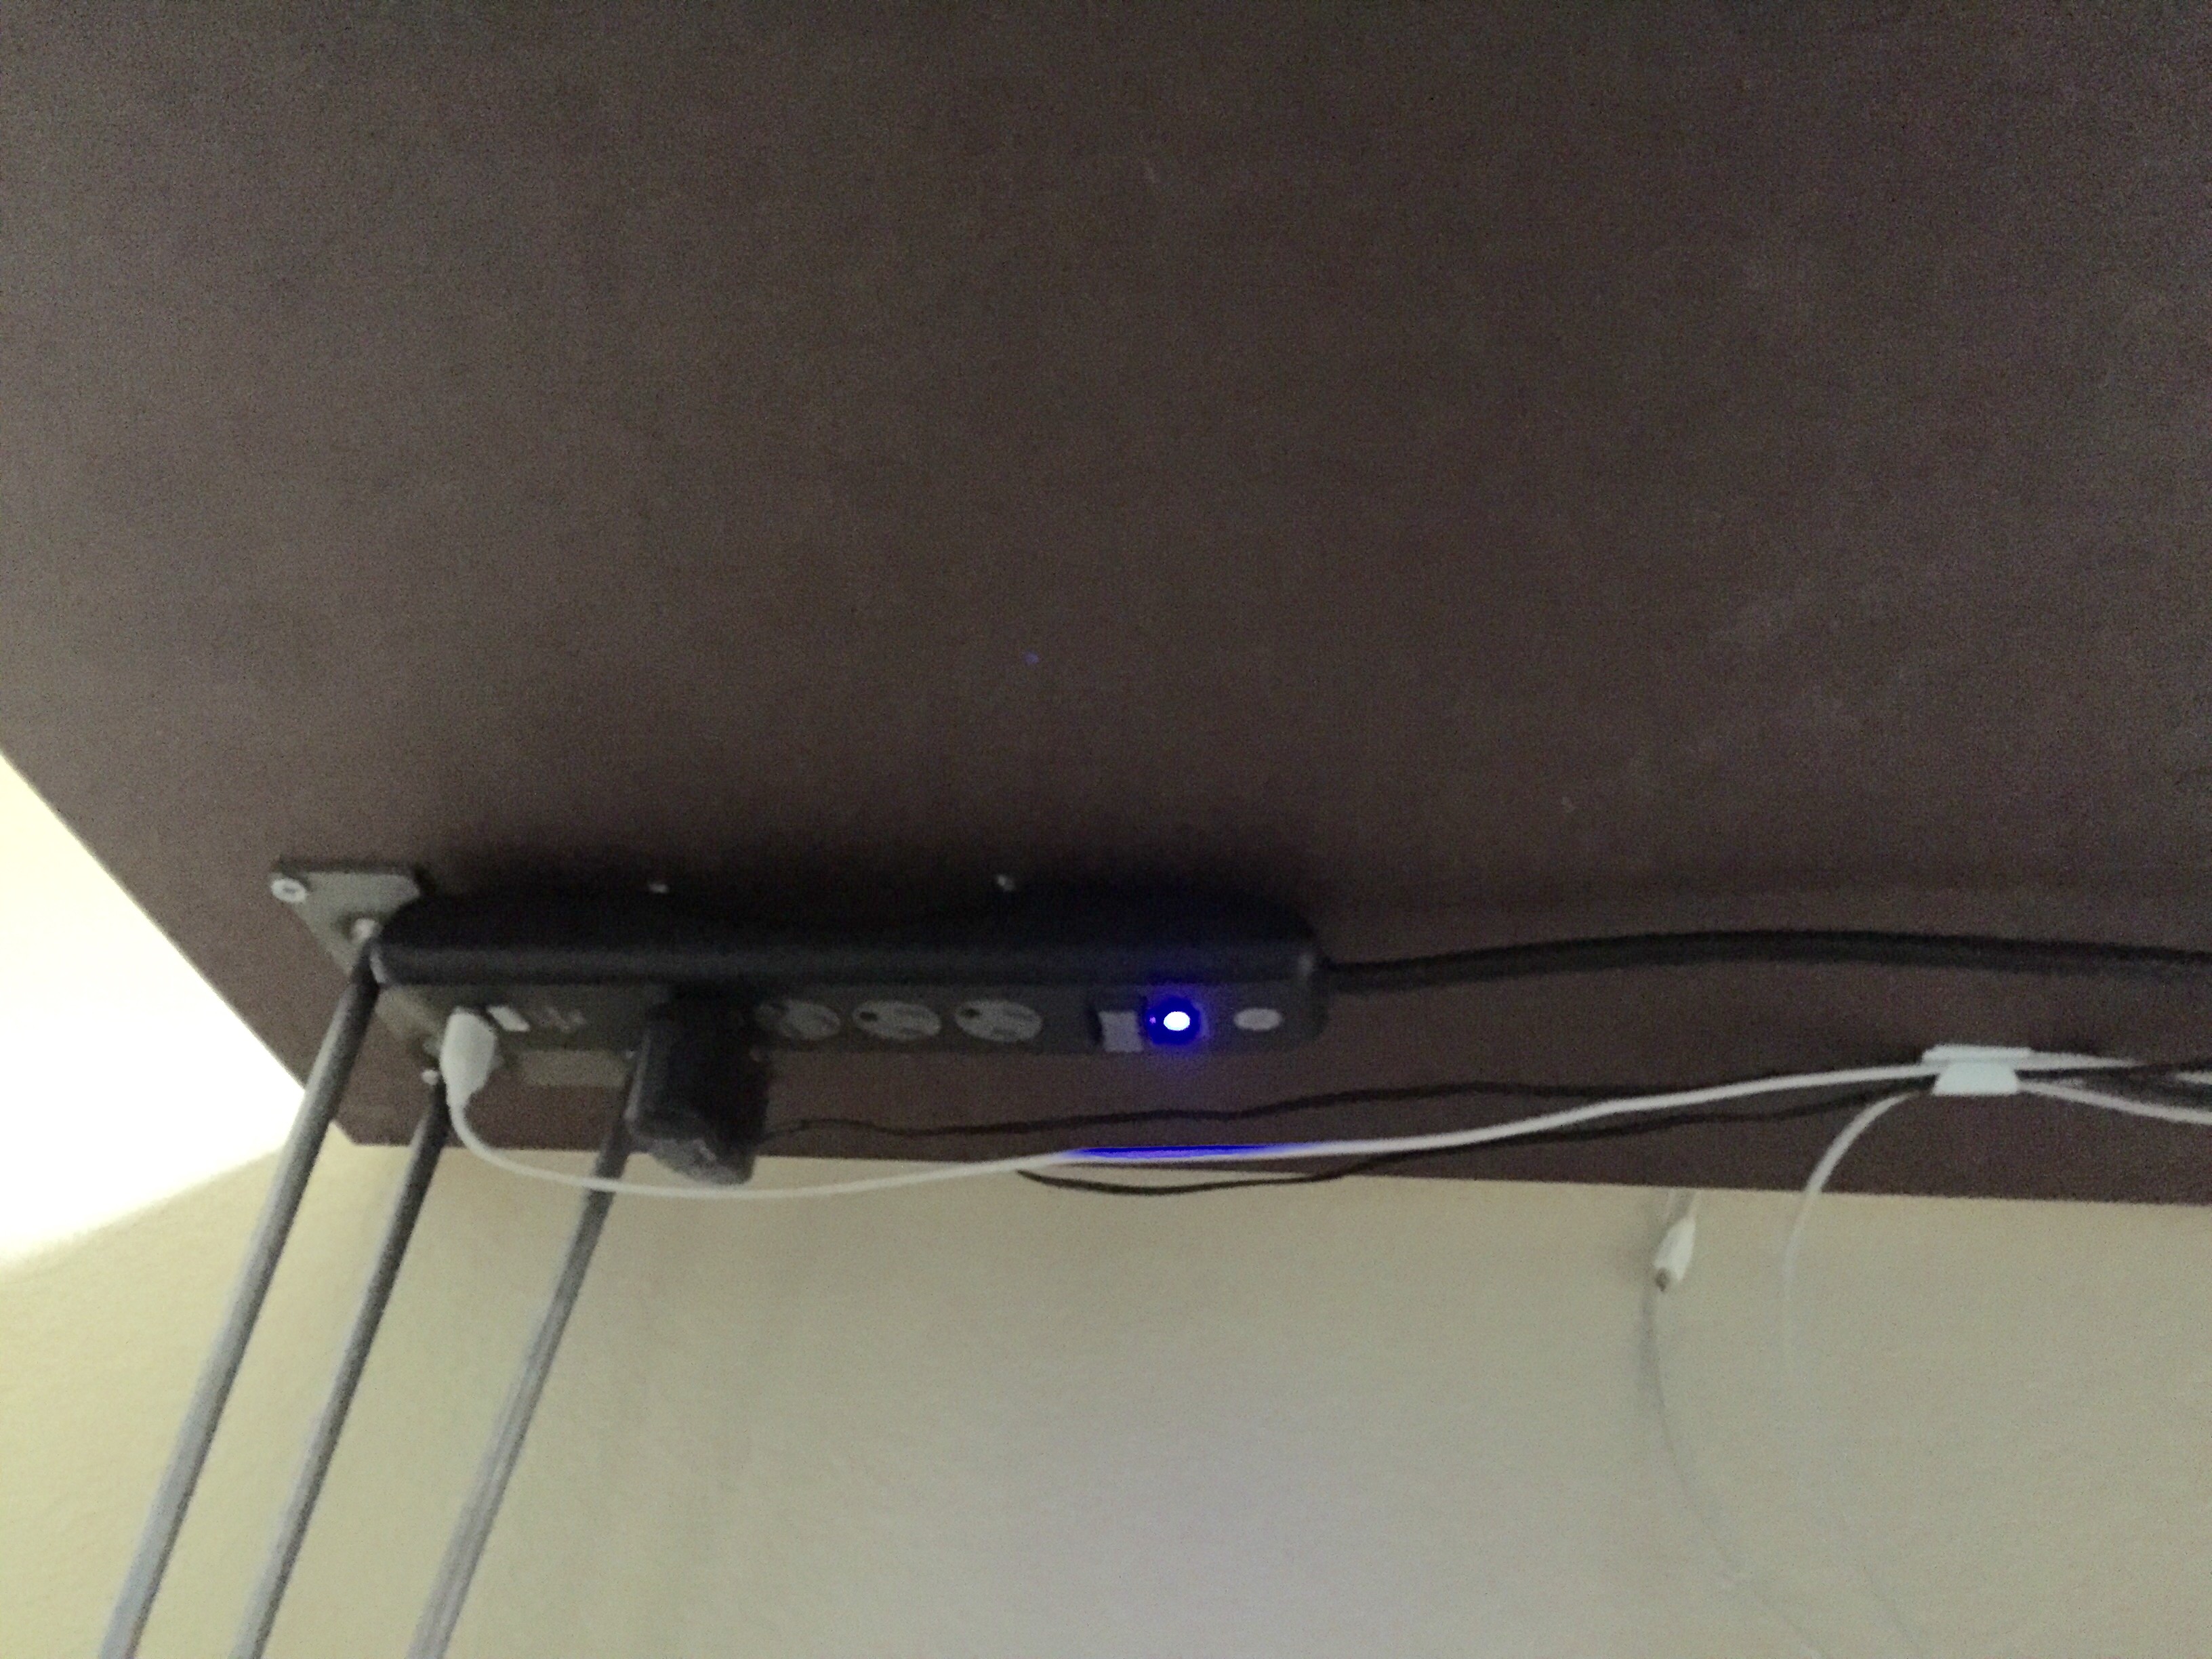 Attached power strip to desk top